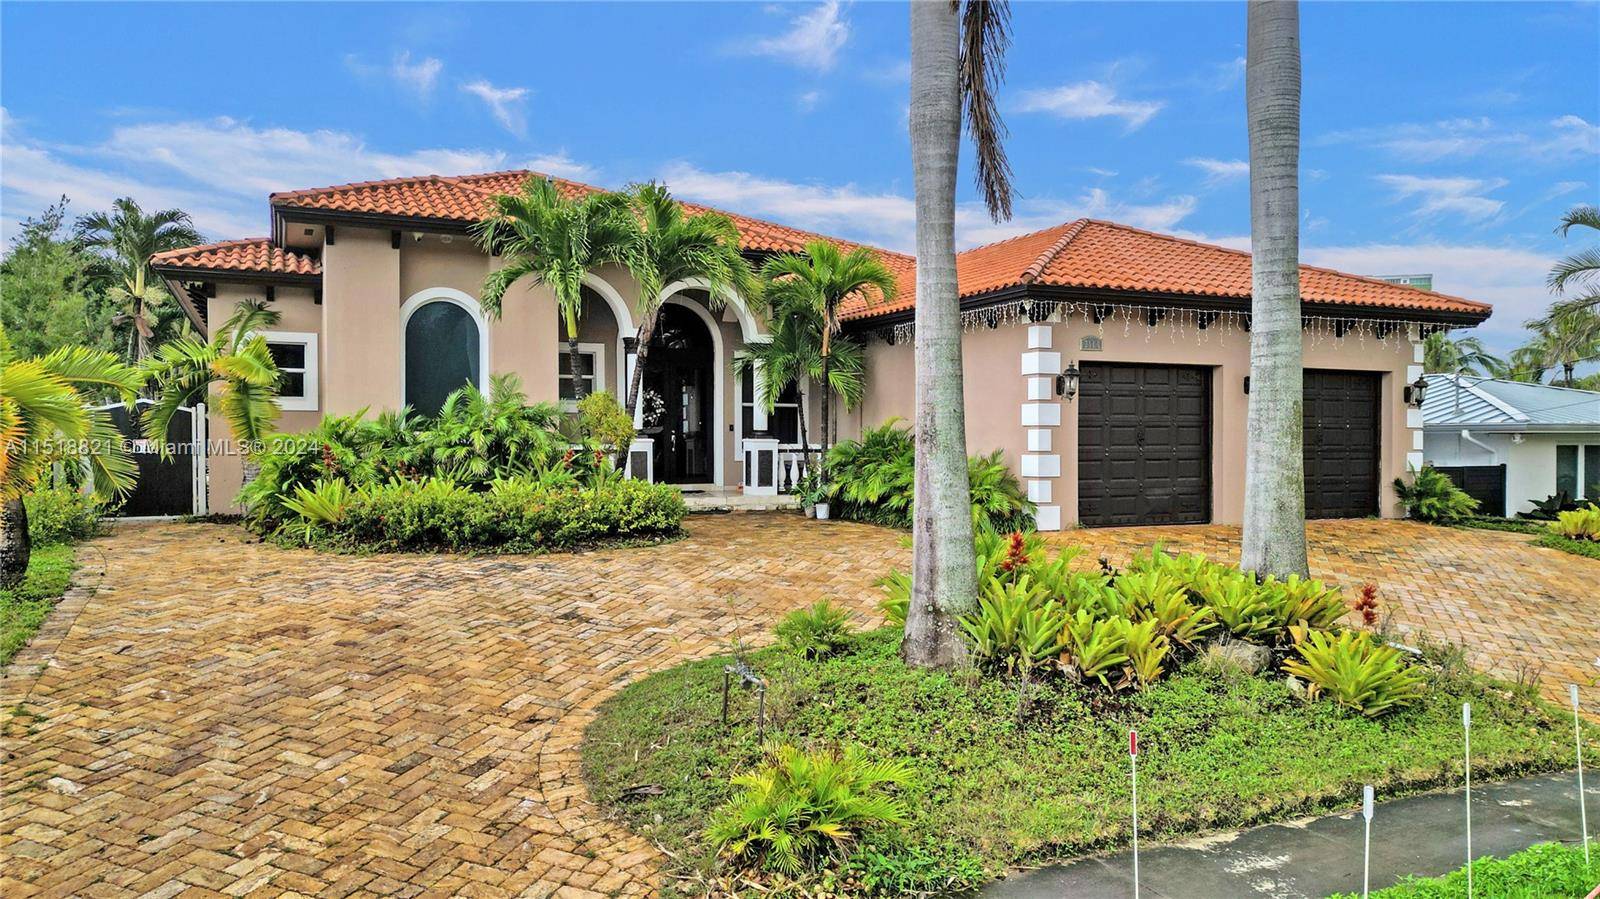 Welcome to your stunning single family 5 bedroom and 4 bathroom home in North Miami !